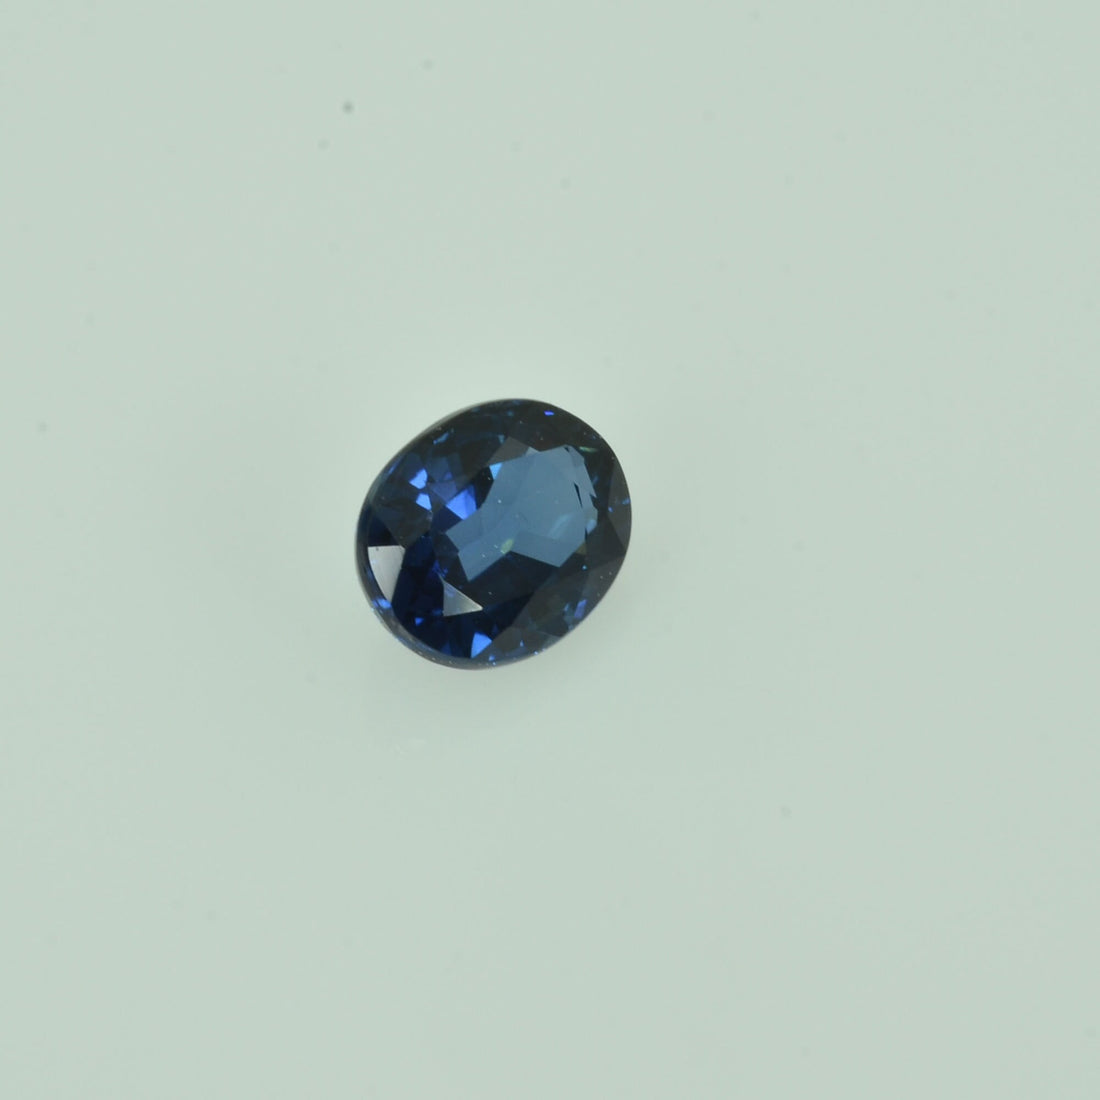 0.64 cts Natural Blue Sapphire Loose Gemstone Oval Cut